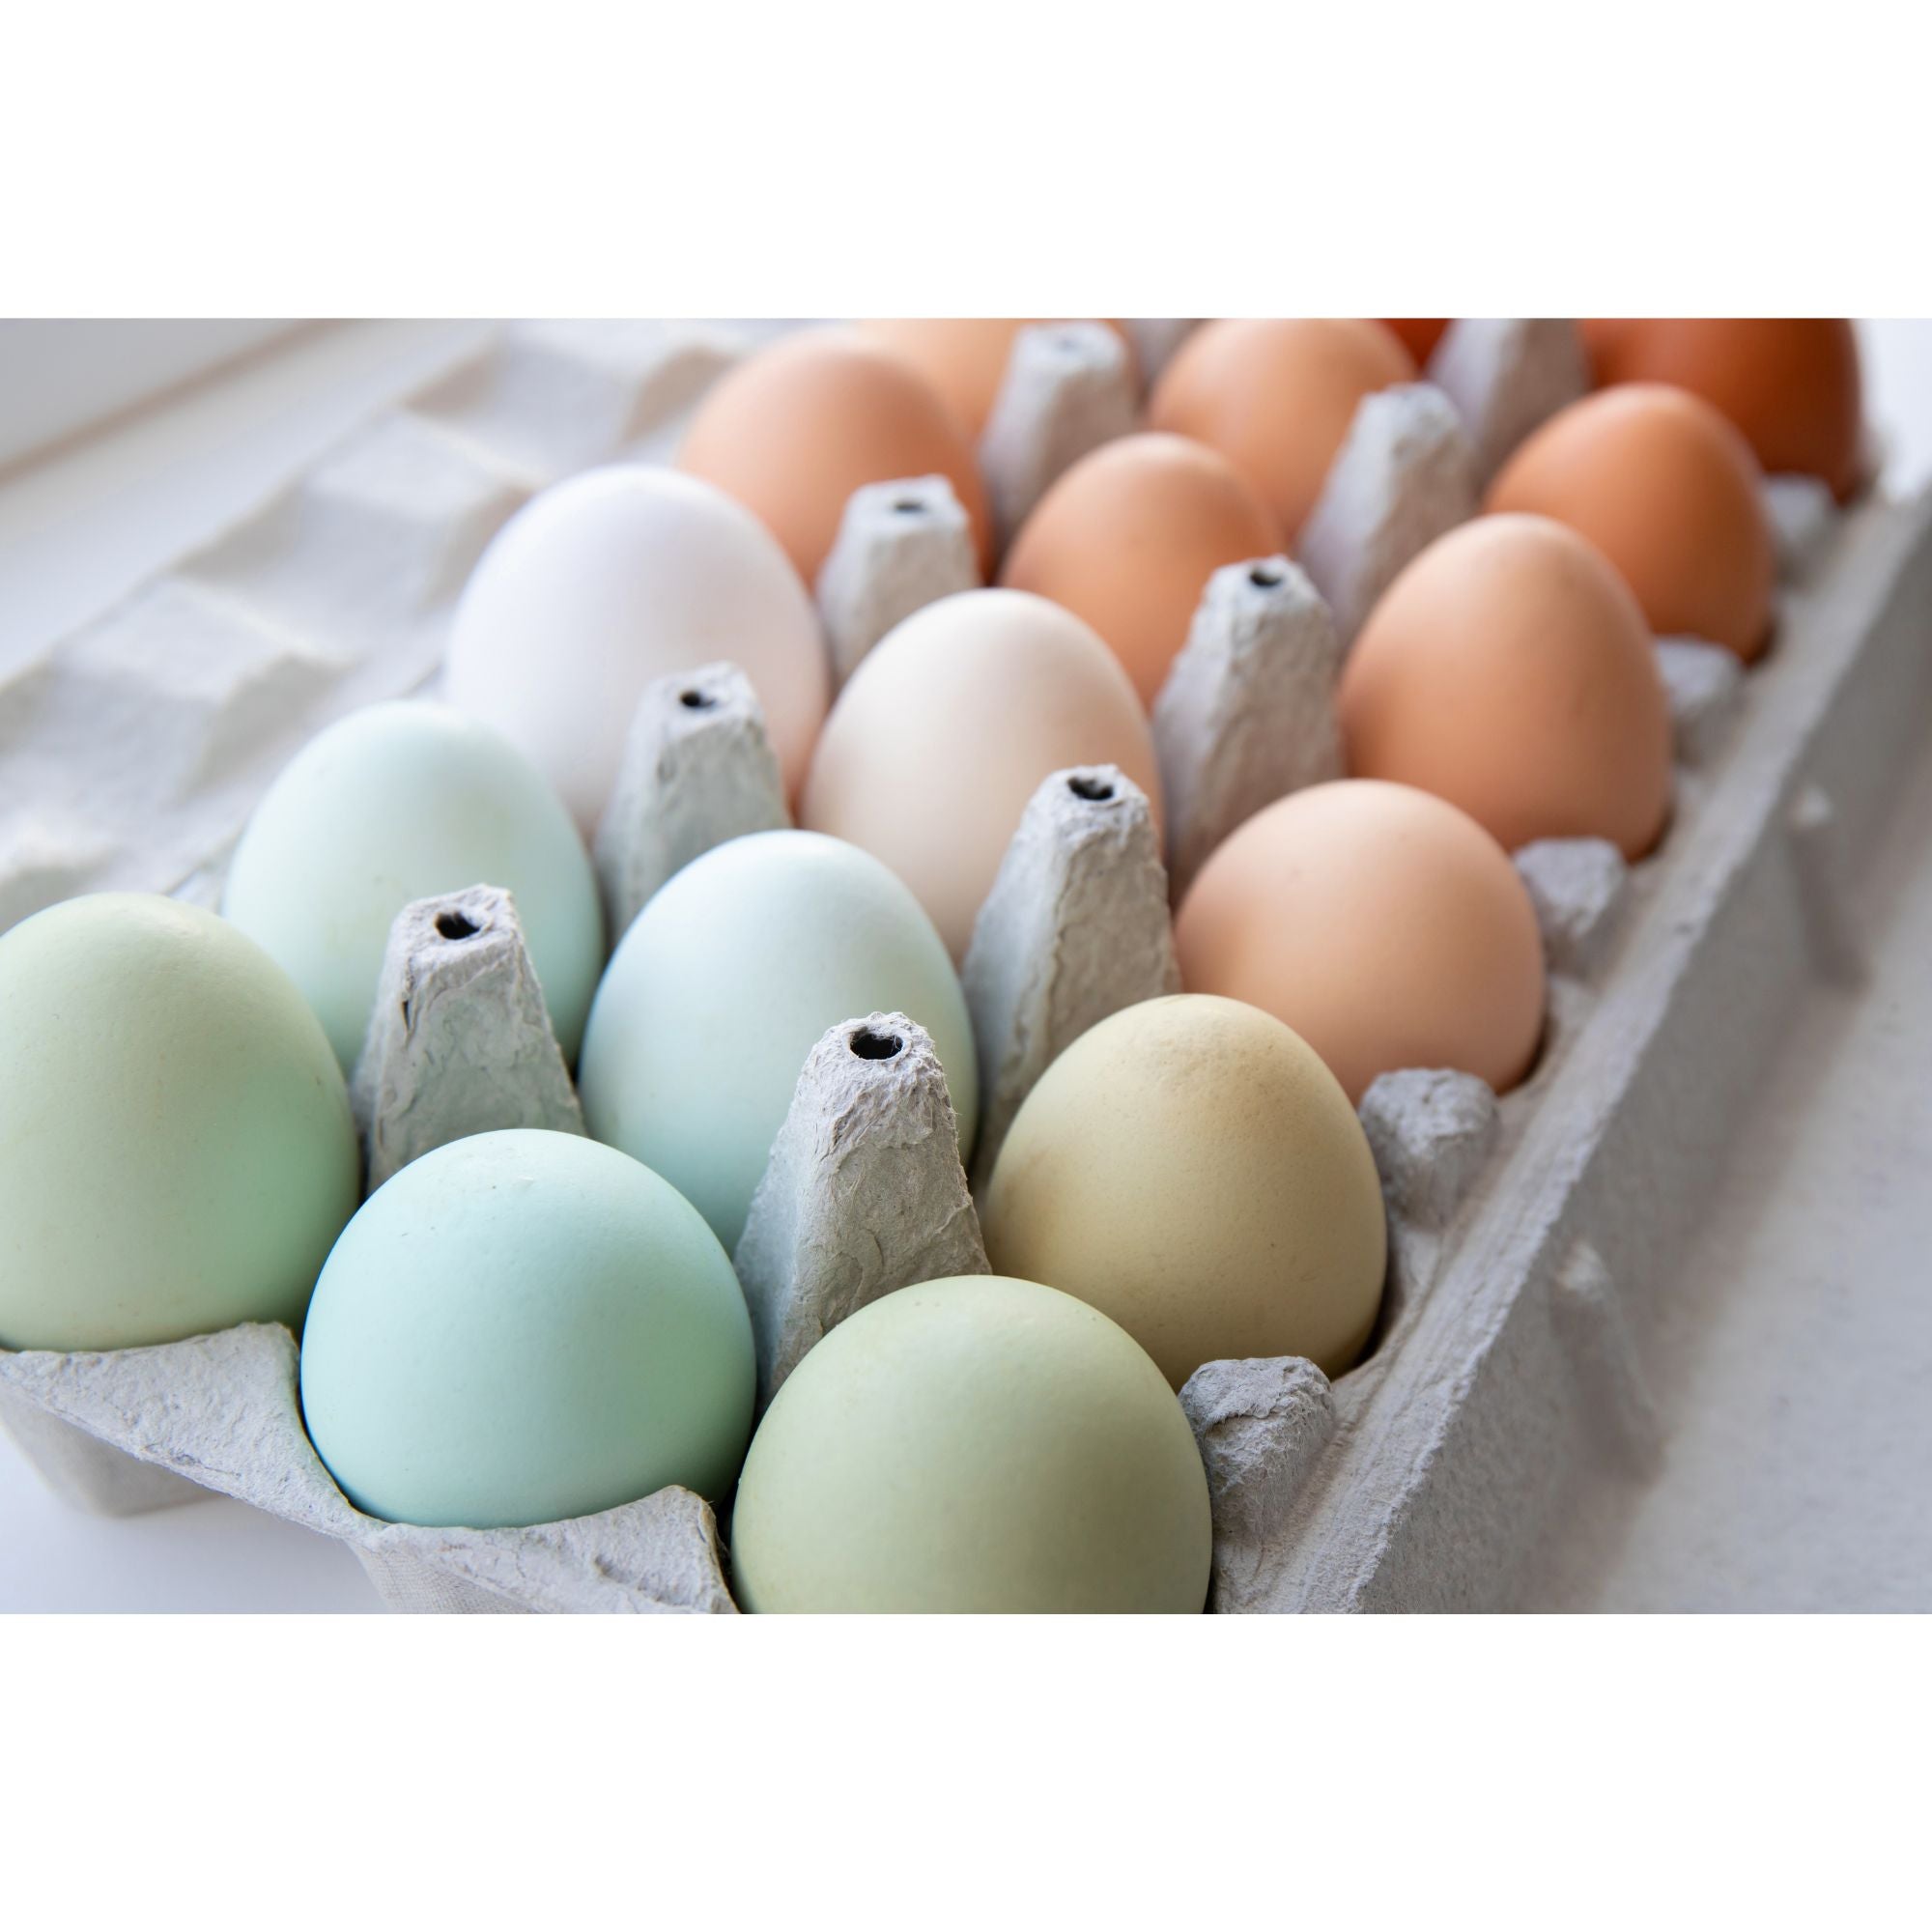 Cleaning and Storing Your Freshly Laid Eggs